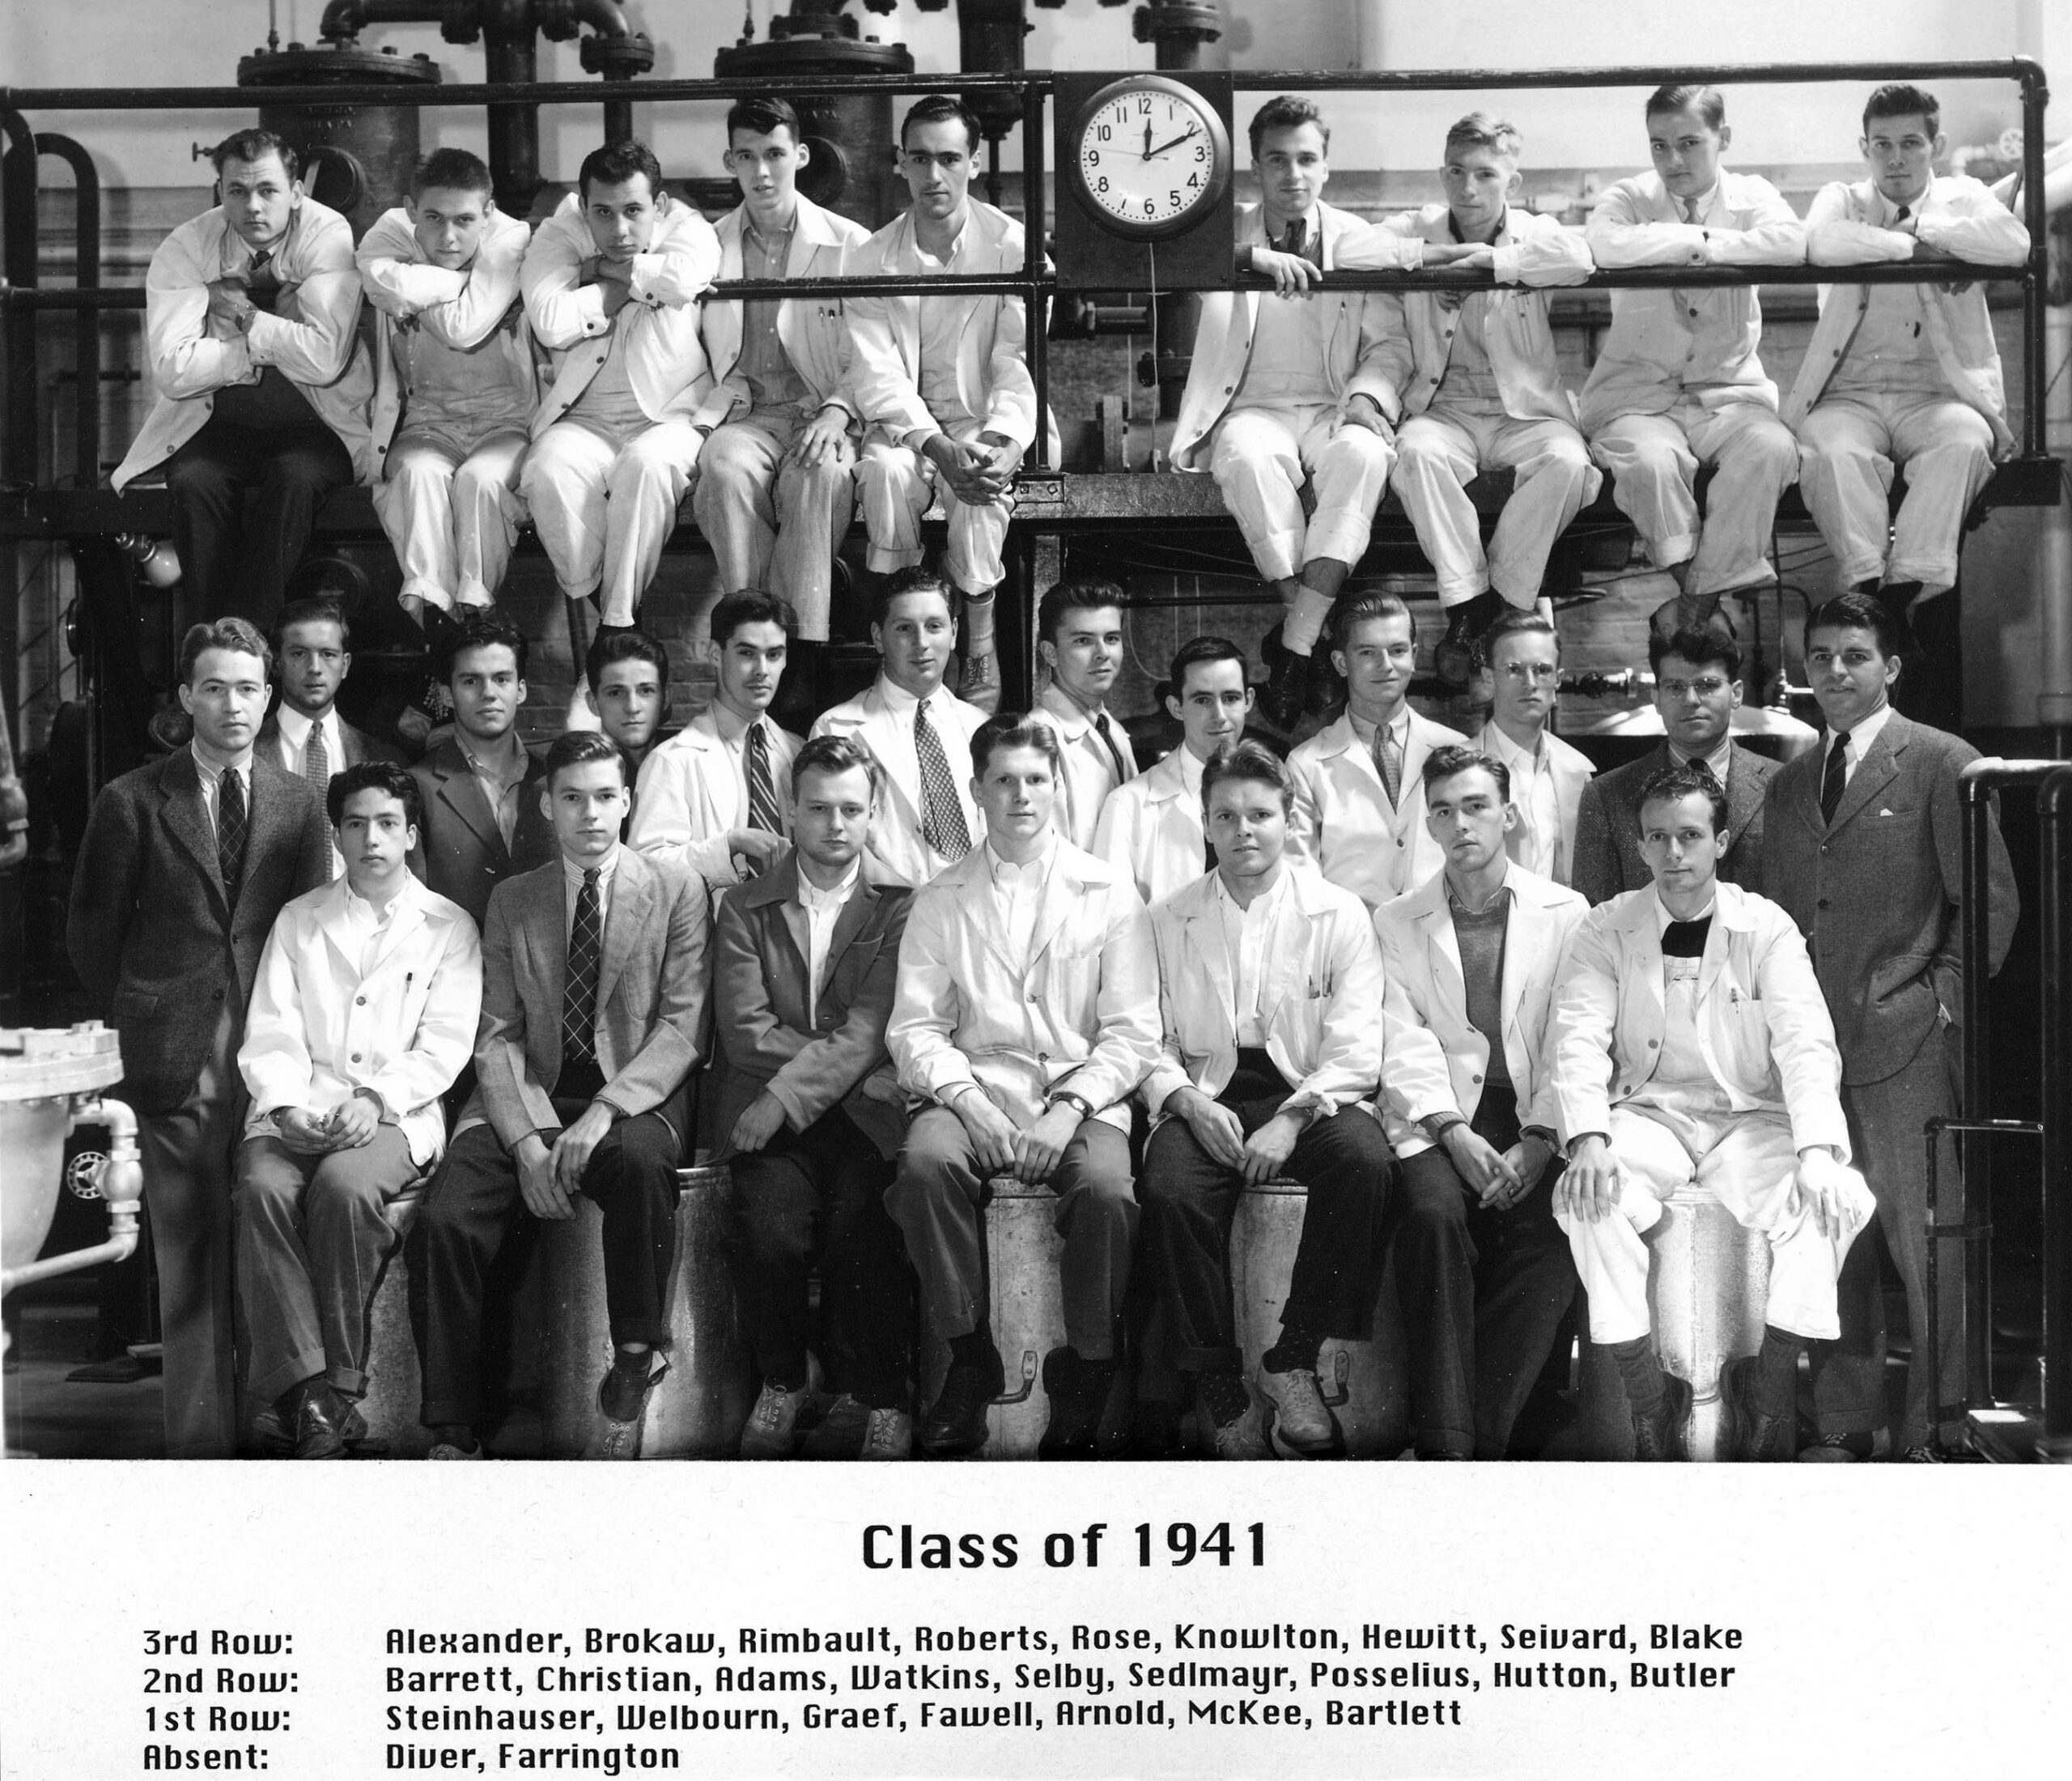 Older black and white photo of young men posing for class picture. The clock says 12:10 p.m.